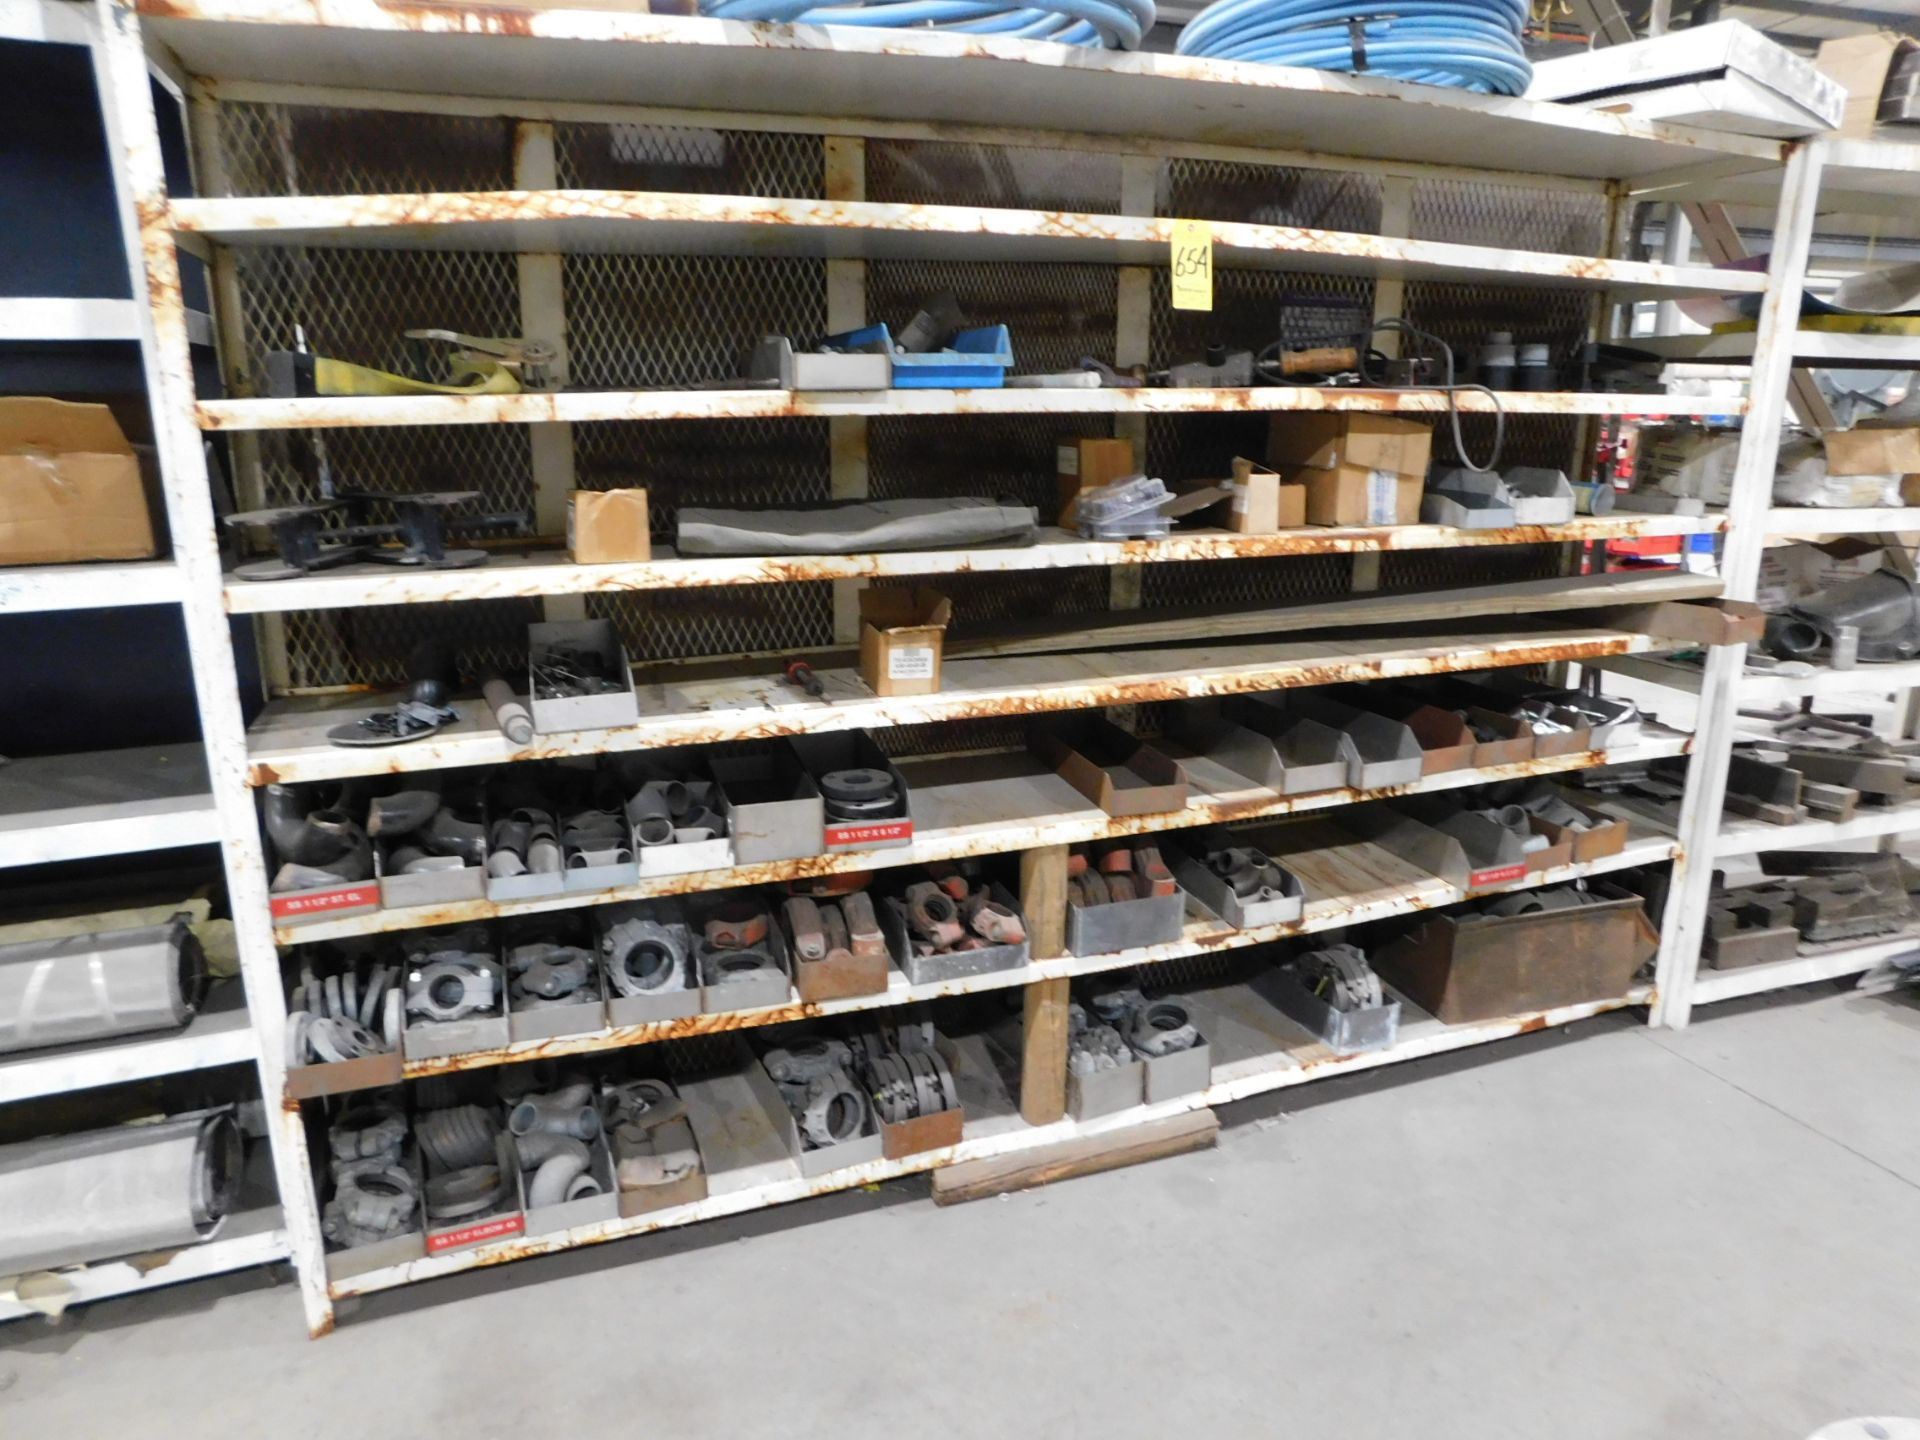 Metal Shelving Unit, Welded Construction, 80" H X 116" W X 18" Deep, with Contents